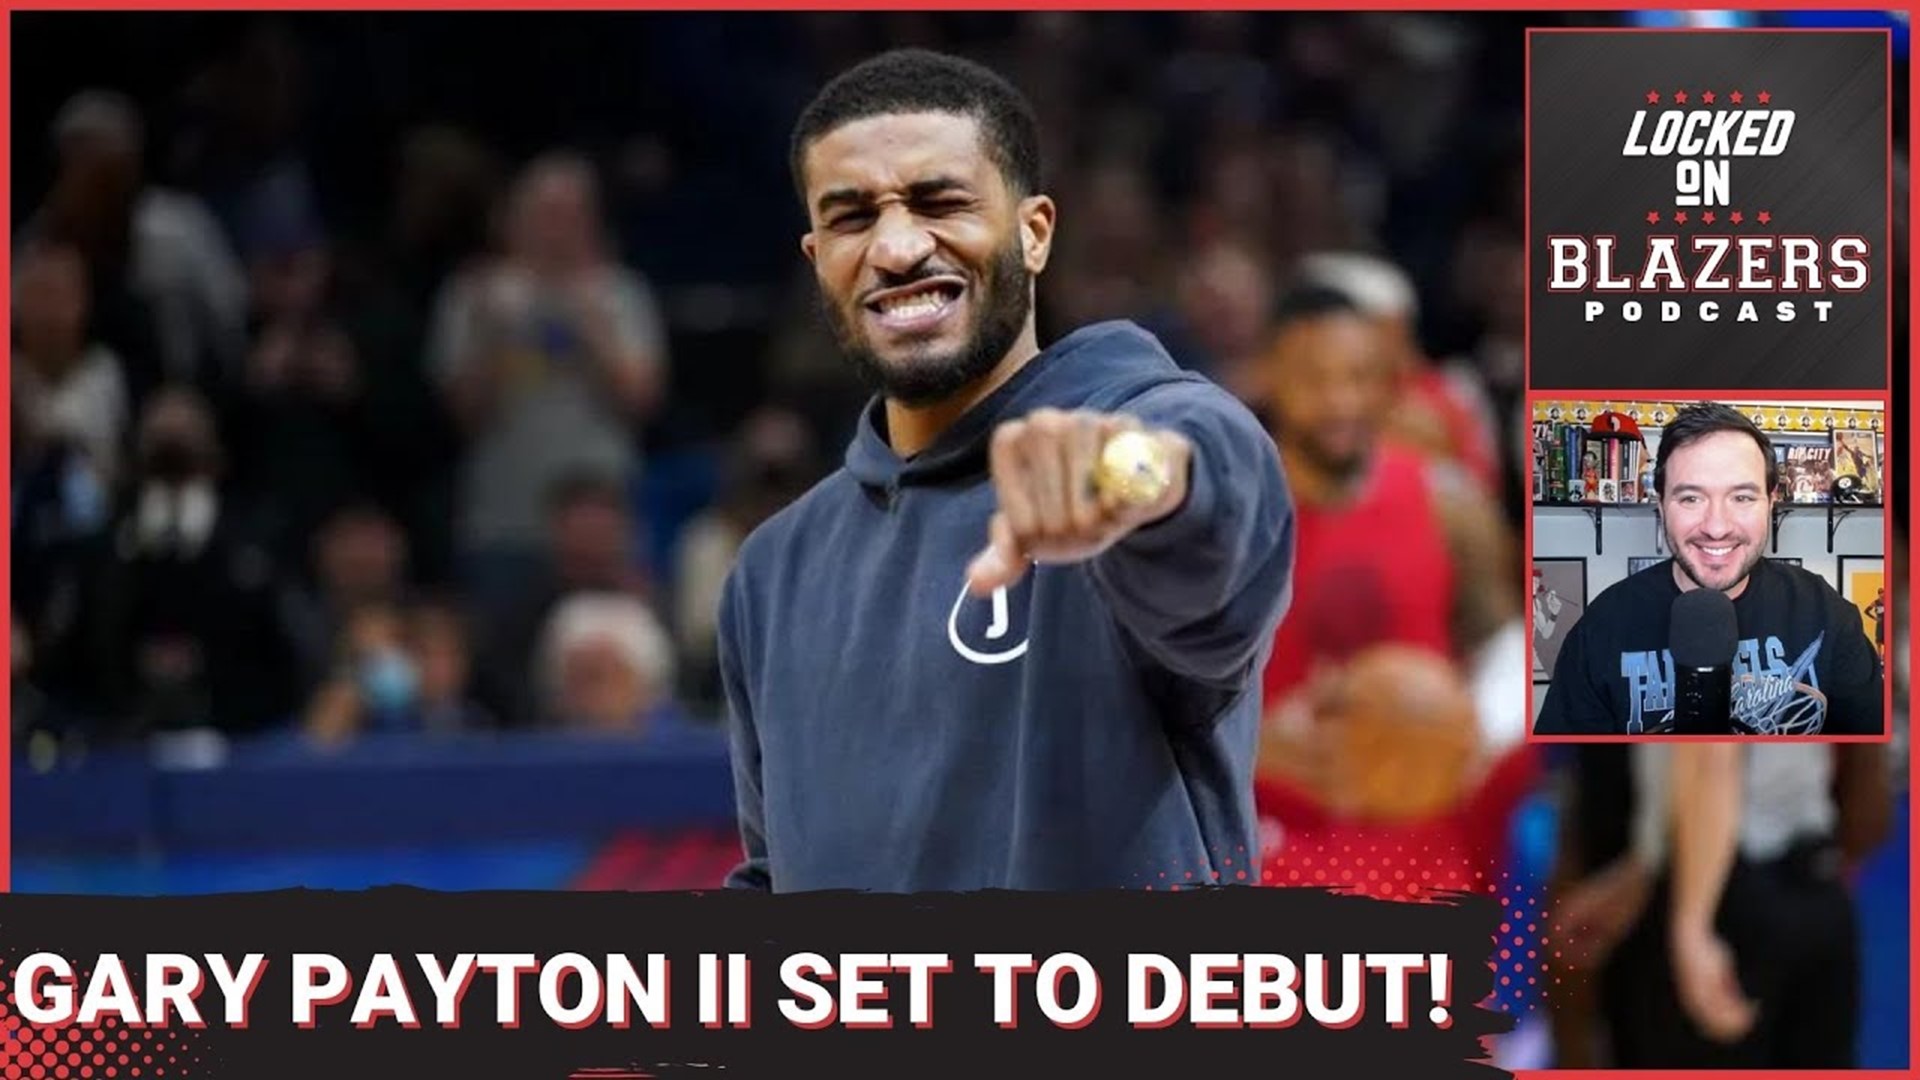 Gary Payton II is expected to play his first game for the Blazers on Monday night at home against the Pistons. We discuss his role, minutes projection and more.